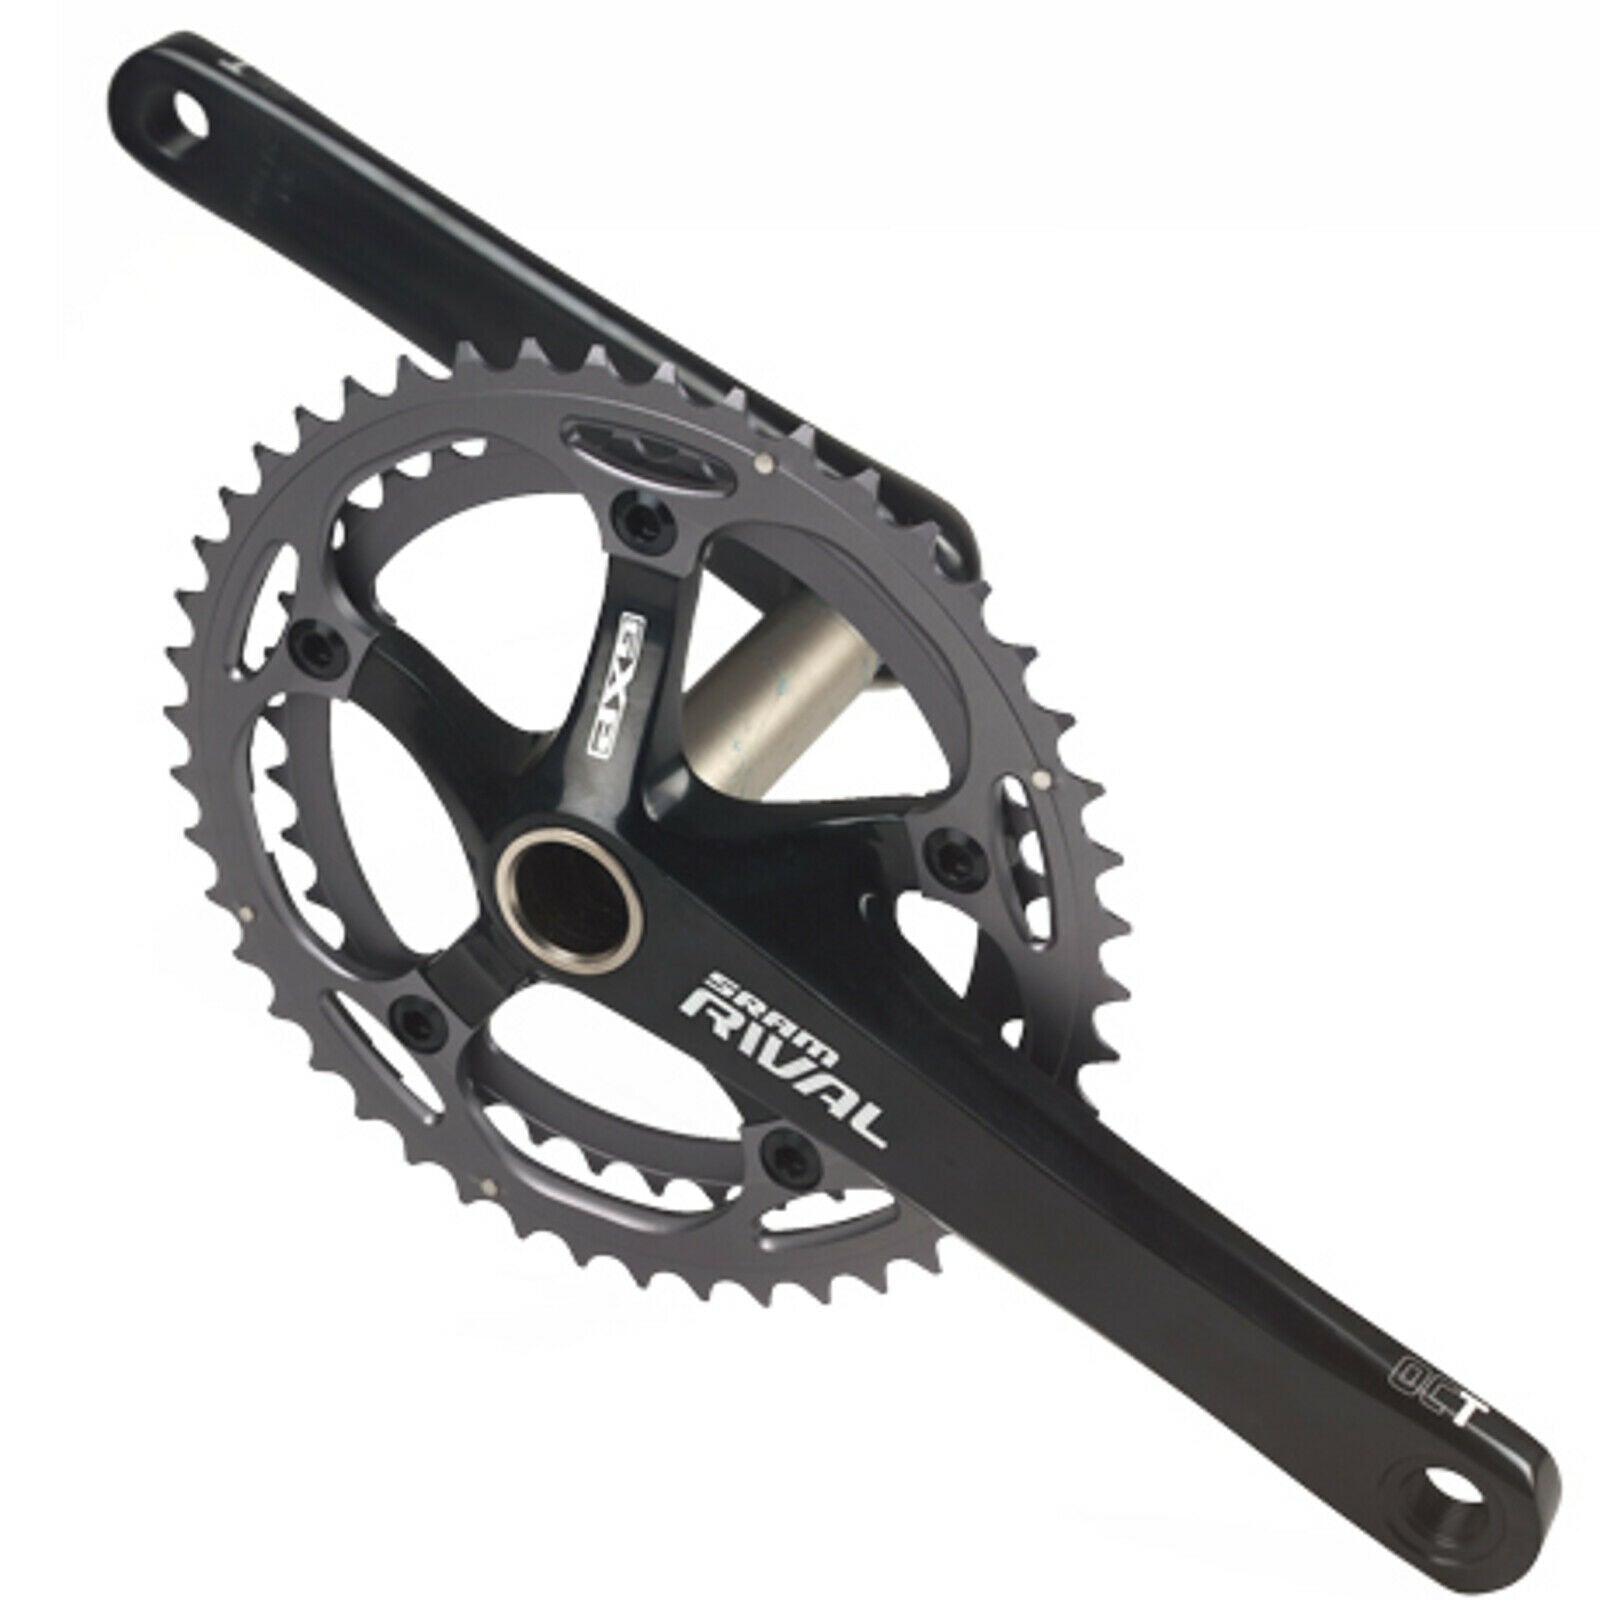 SRAM Rival GXP Double Chainset 53 / 39T - 170mm or 175mm